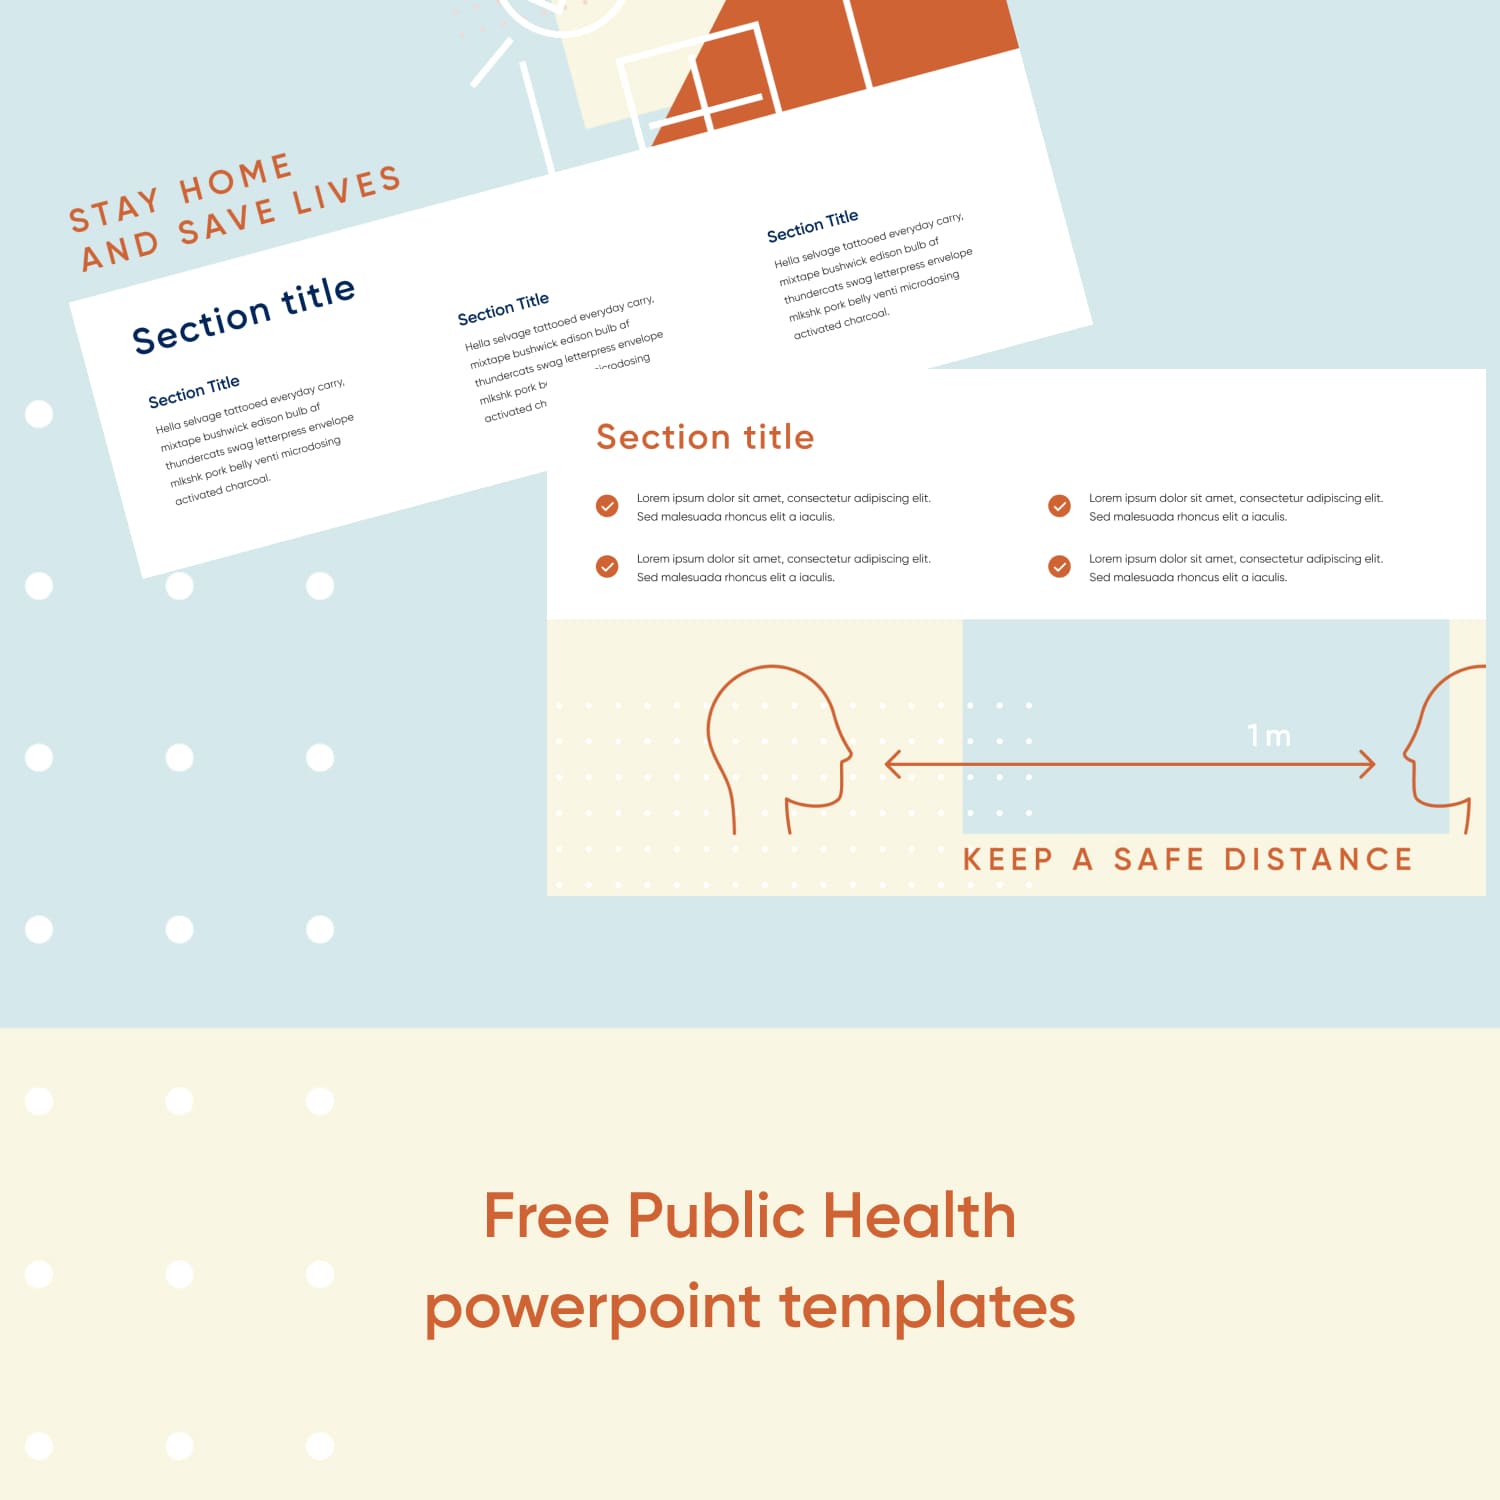 Images with Public Health Powerpoint Templates.